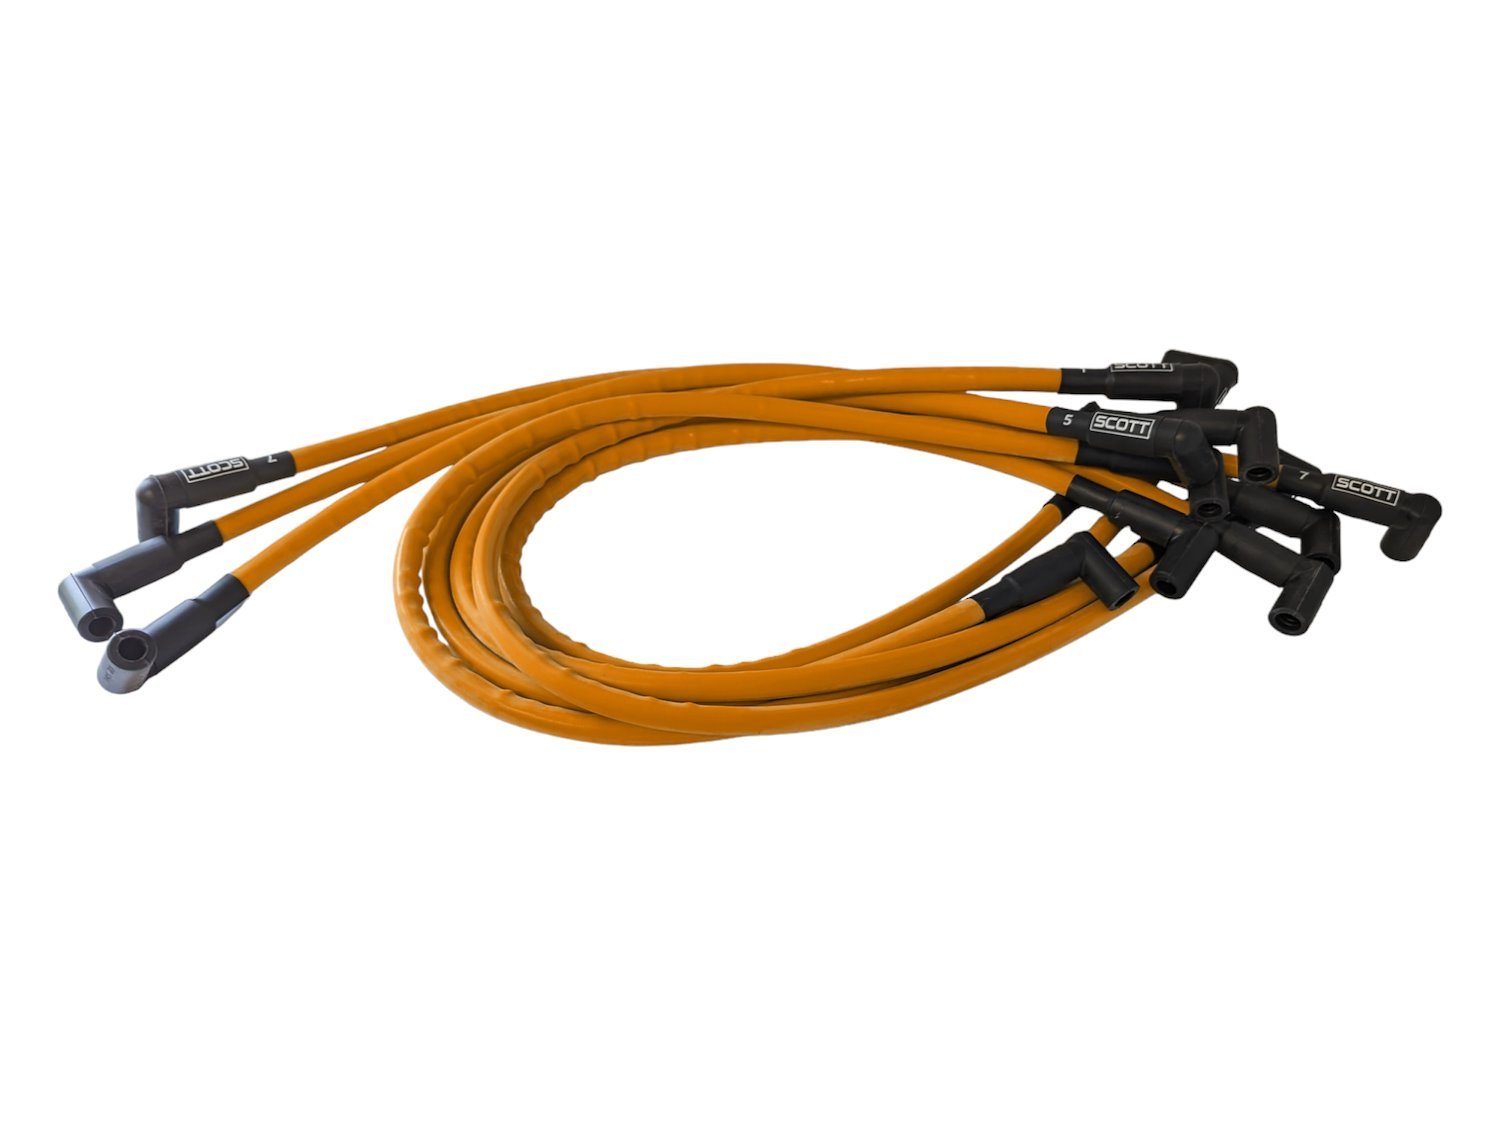 SPW300-CH-402-5 Super Mag Fiberglass-Oversleeved Spark Plug Wire Set for Small Block Chevy, Over Valve Cover [Orange]